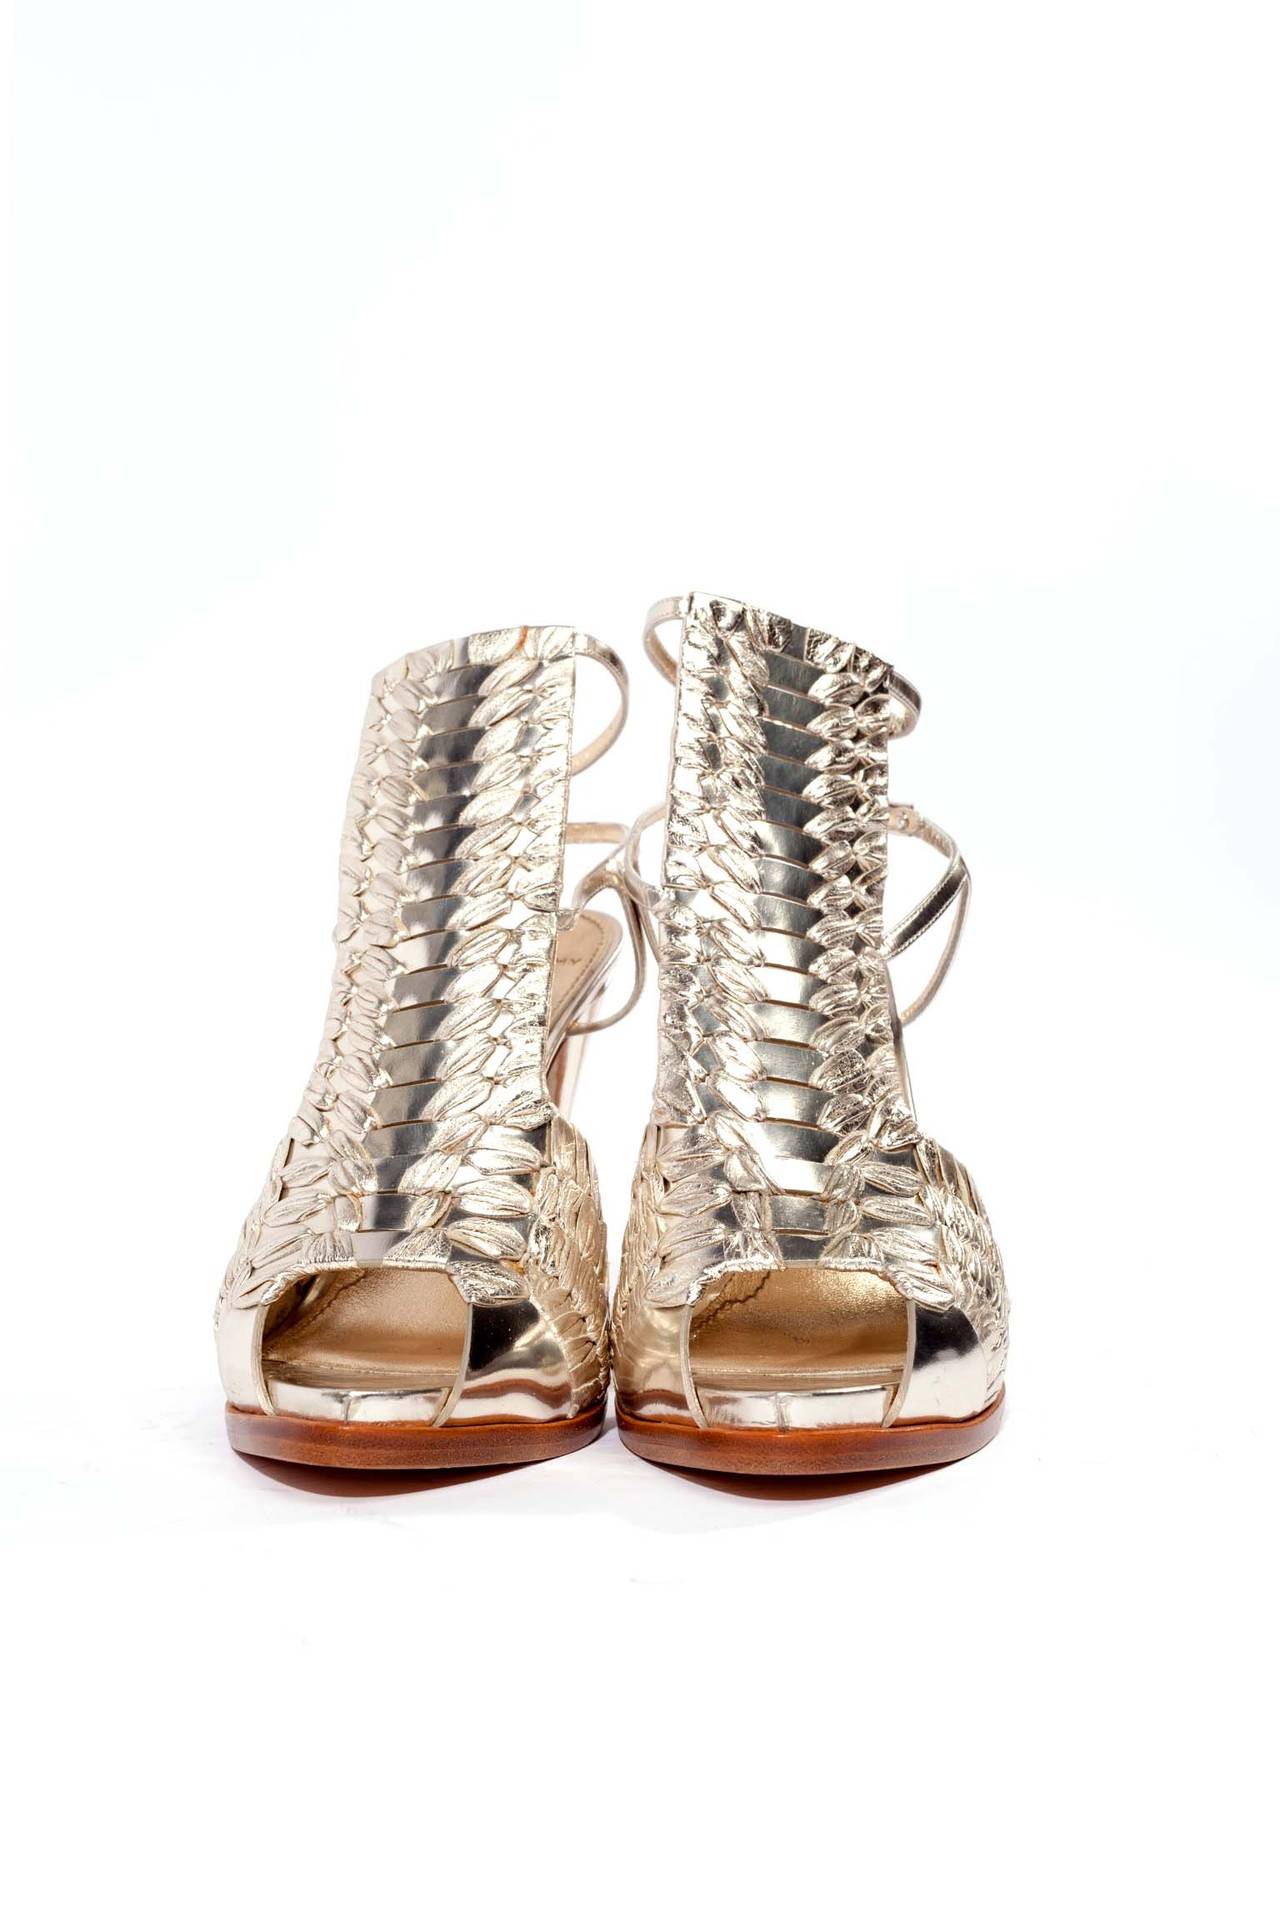 Givenchy gold braided gladiator heels 1